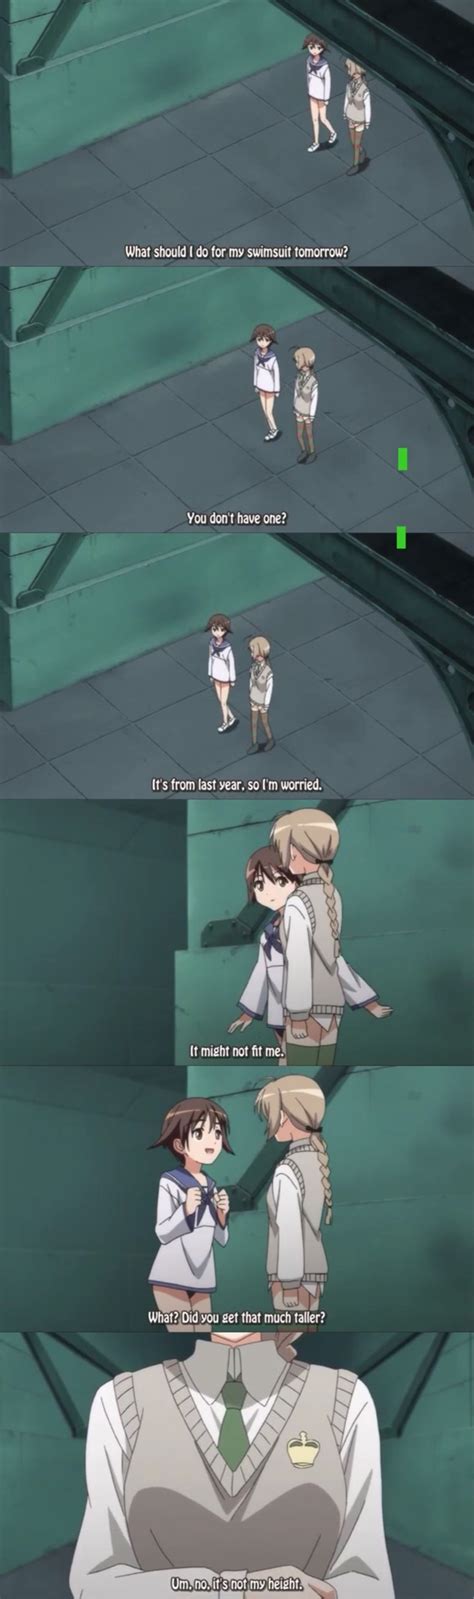 Strike Witches Meme By Mrblack Memedroid